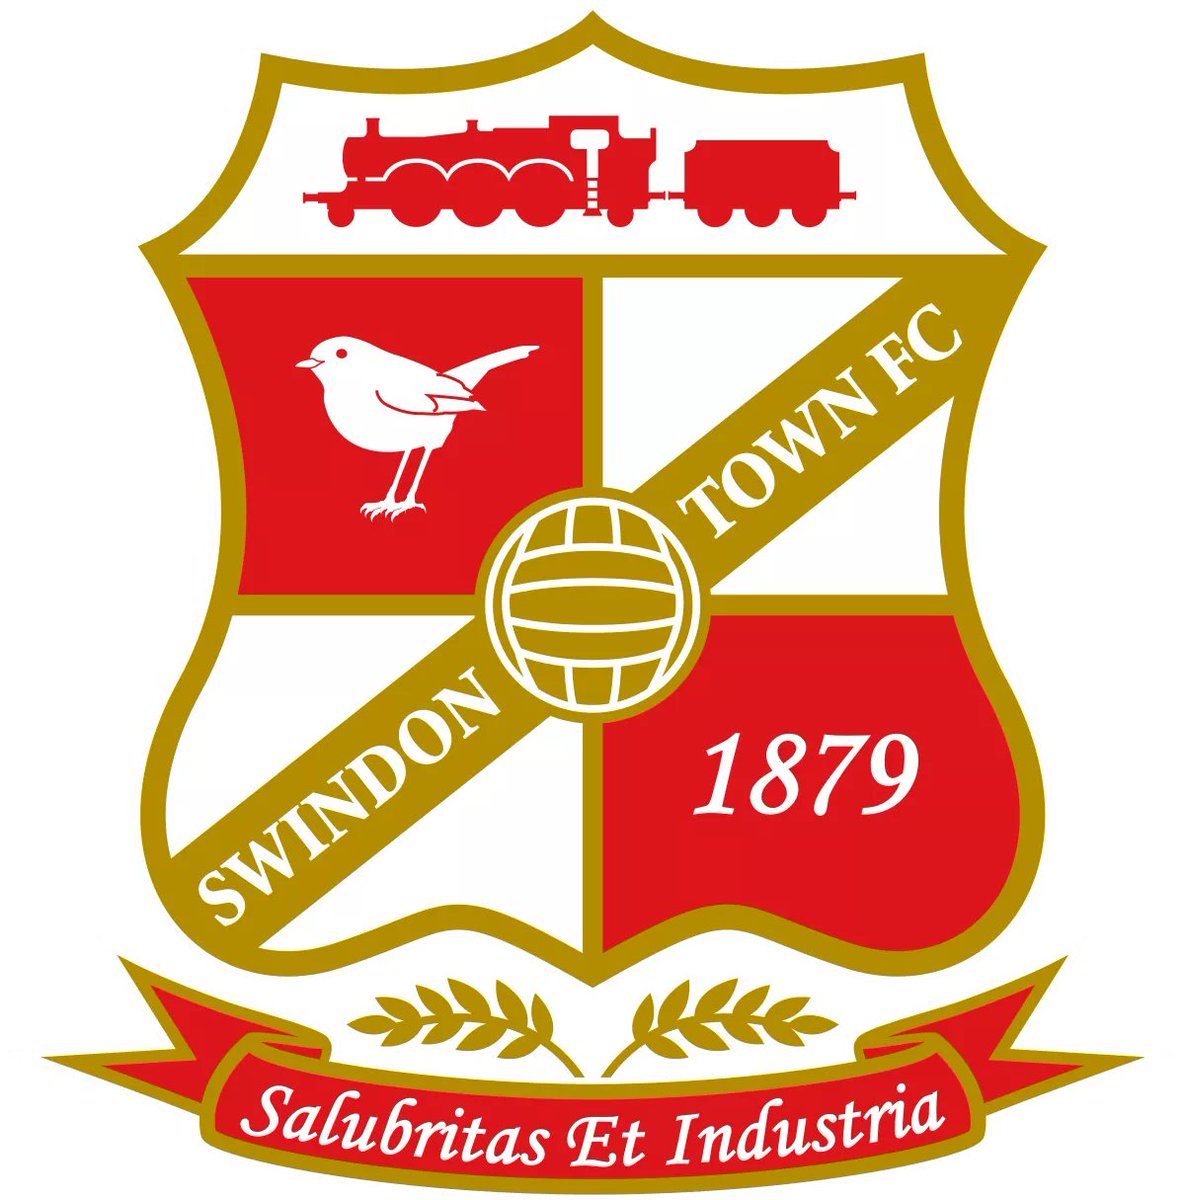 77) Swindon Town Points: 82 Manager: Neil Ardley KERRY! WHAAT?? KERRY! WHAAT?? SWINDON HAVE NO CENTRAL MIDFIELD... ... WHAT??